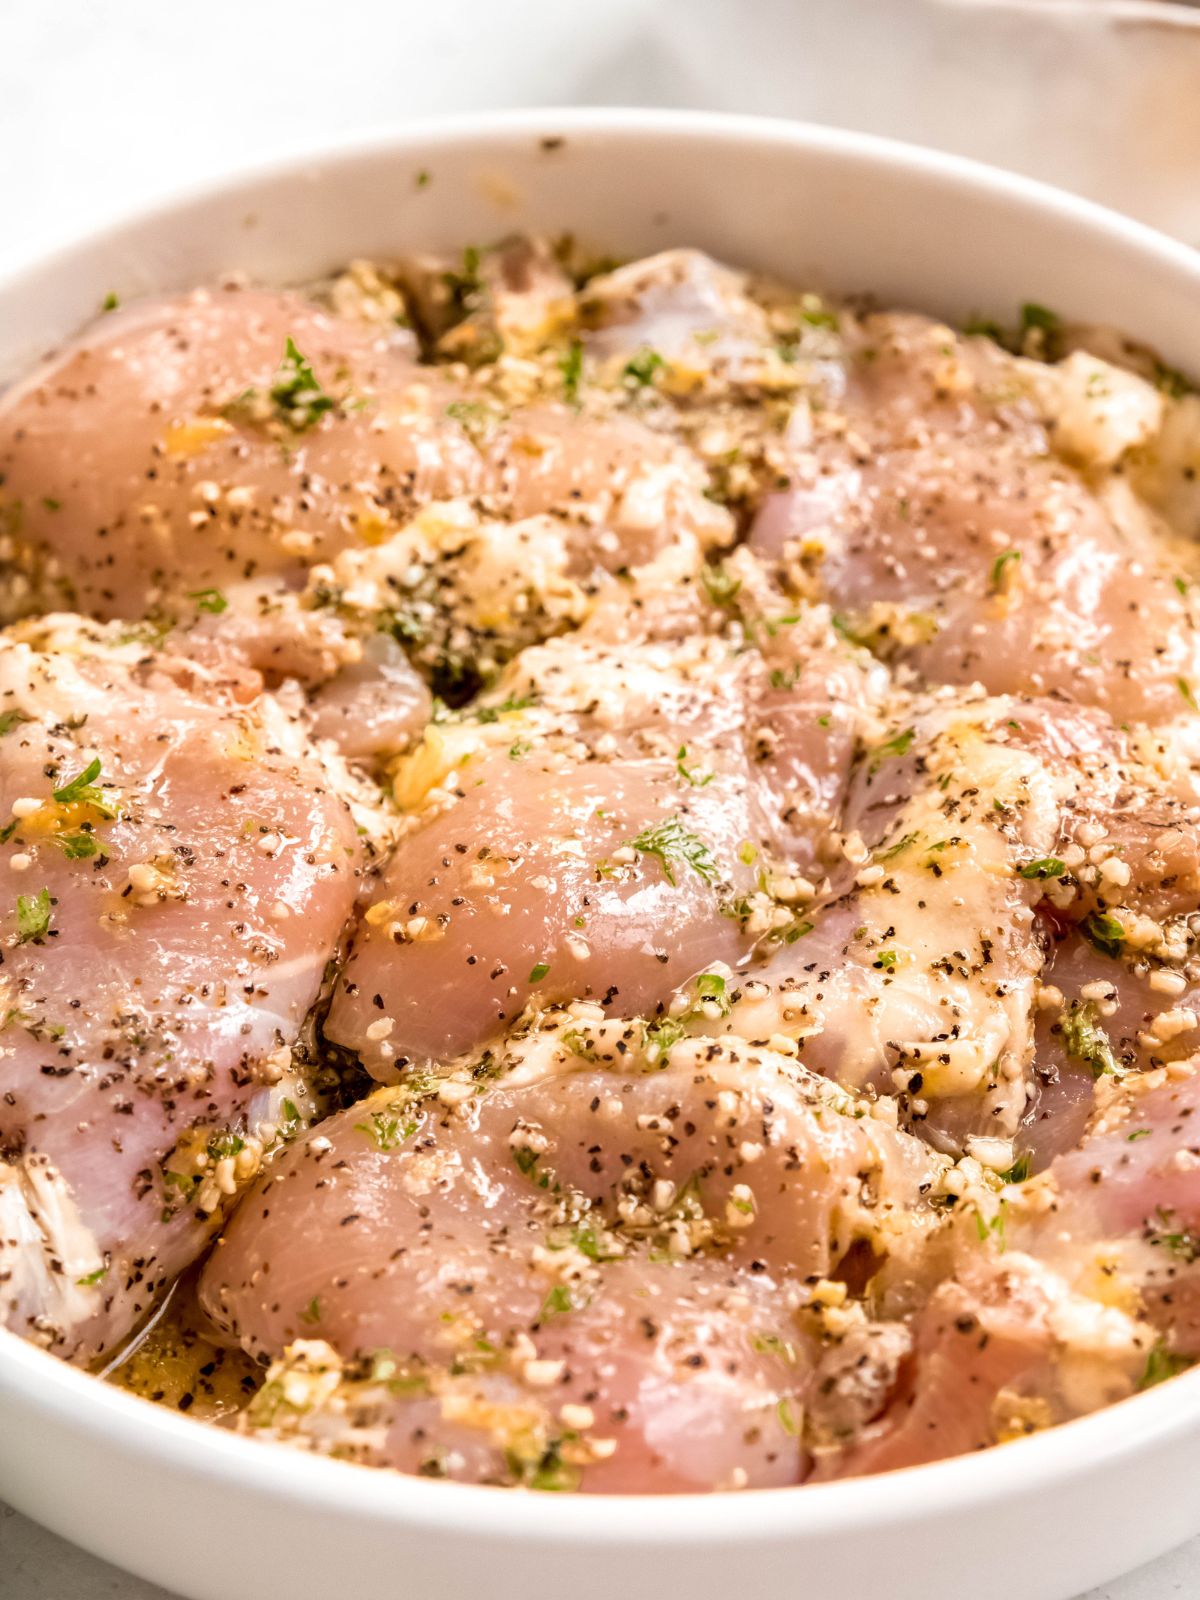 45 degree angle shot of chicken thighs marinating in lemon pepper marinade.